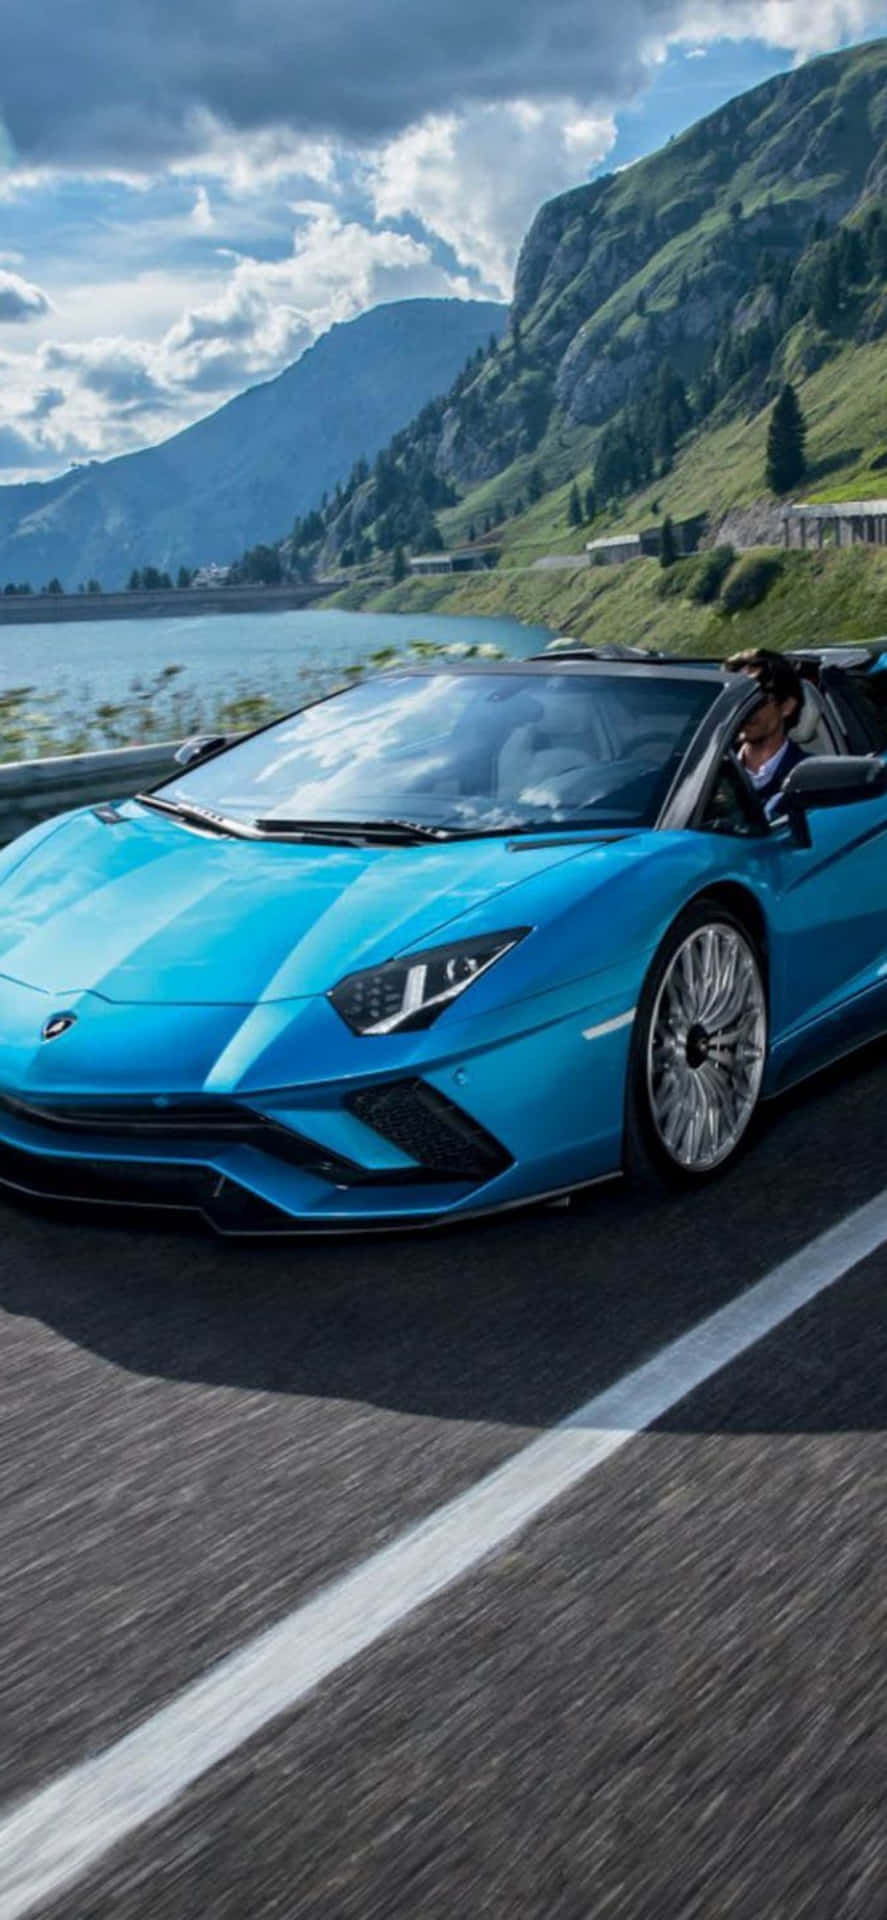 Experience the thrills of luxury with an Iphone X Lamborghini